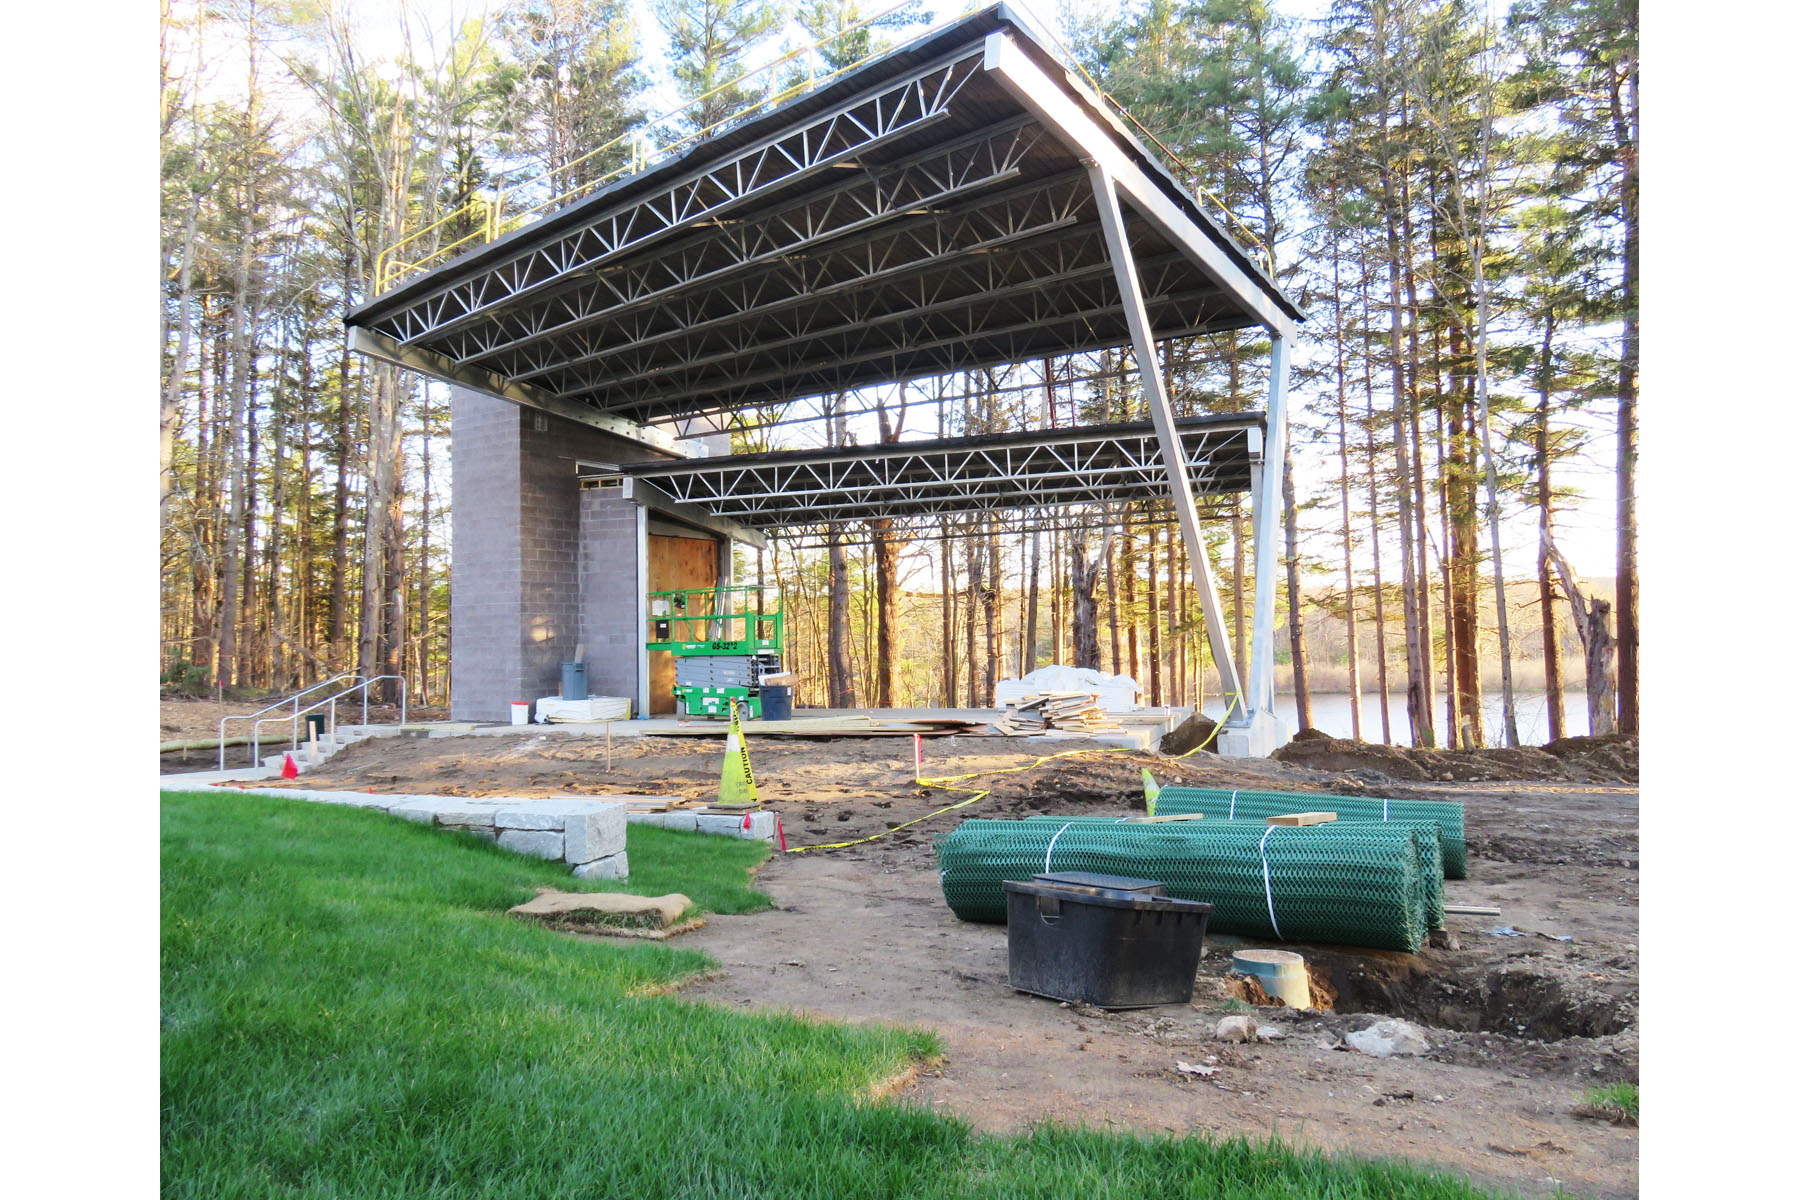 Amphitheater even closer to opening day